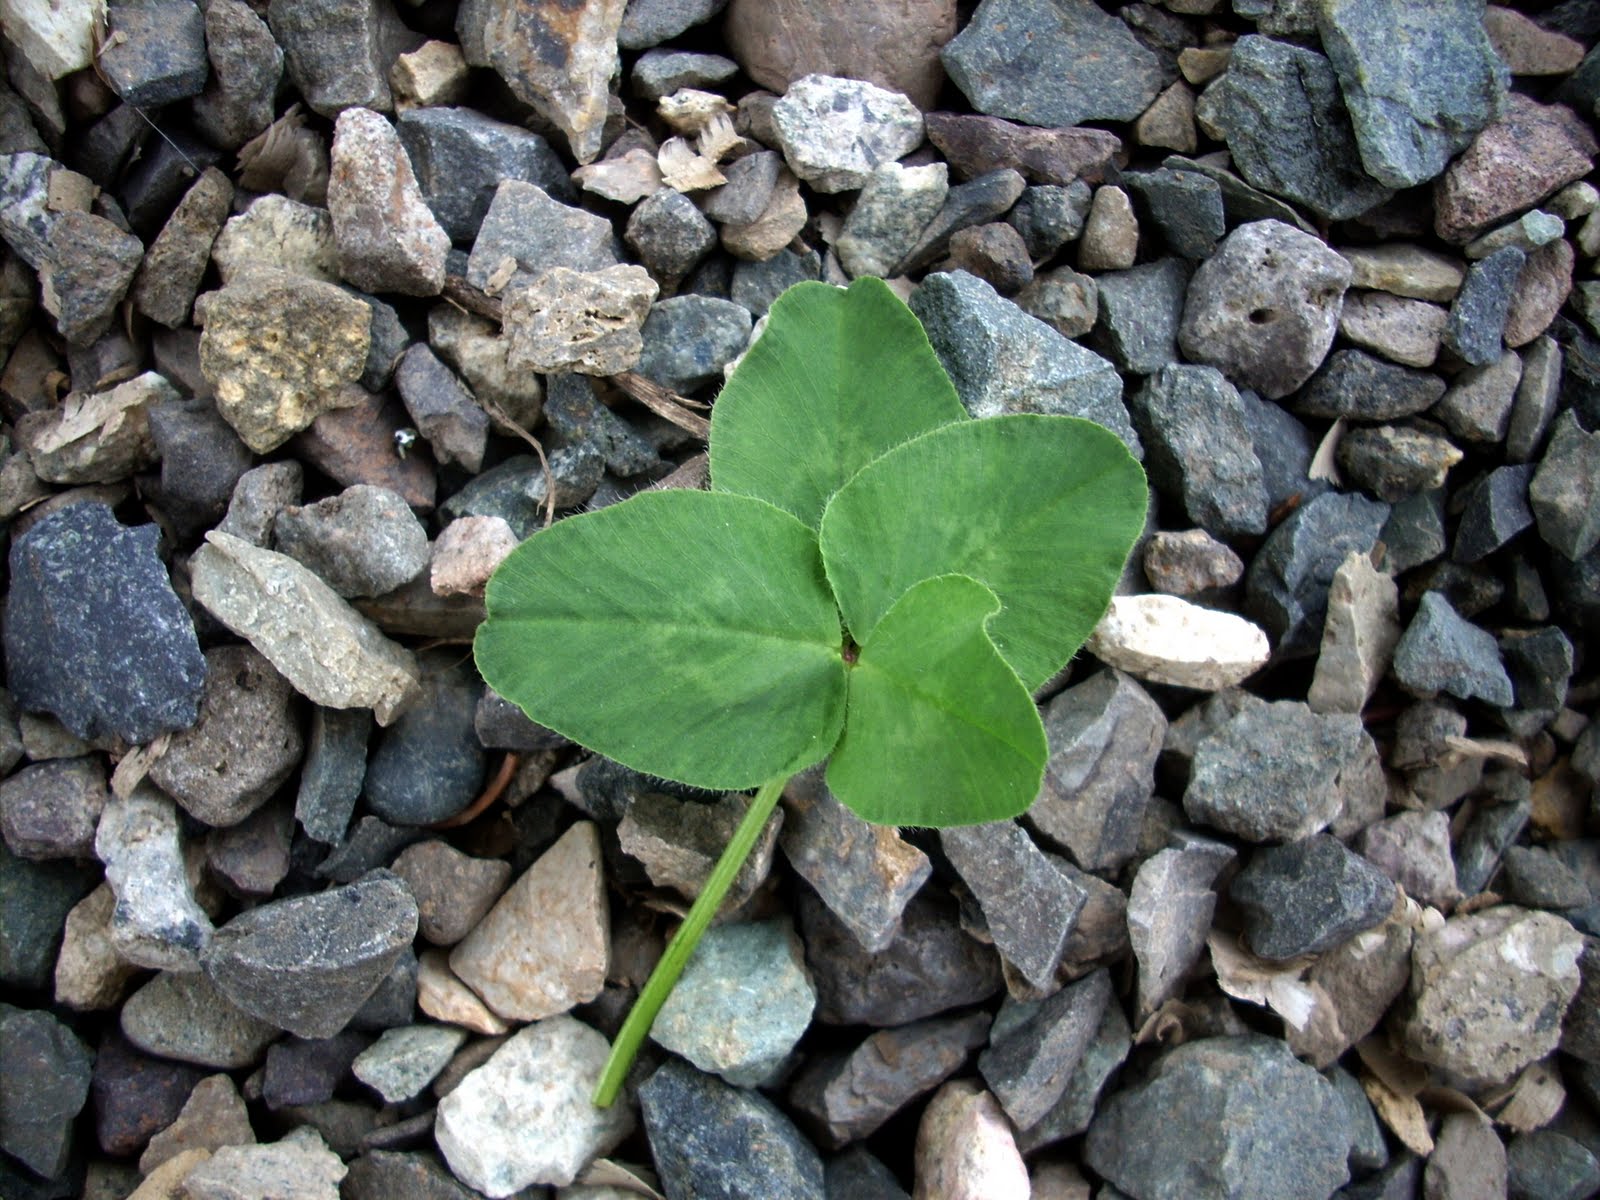 How To Find A Four Leaf Clover